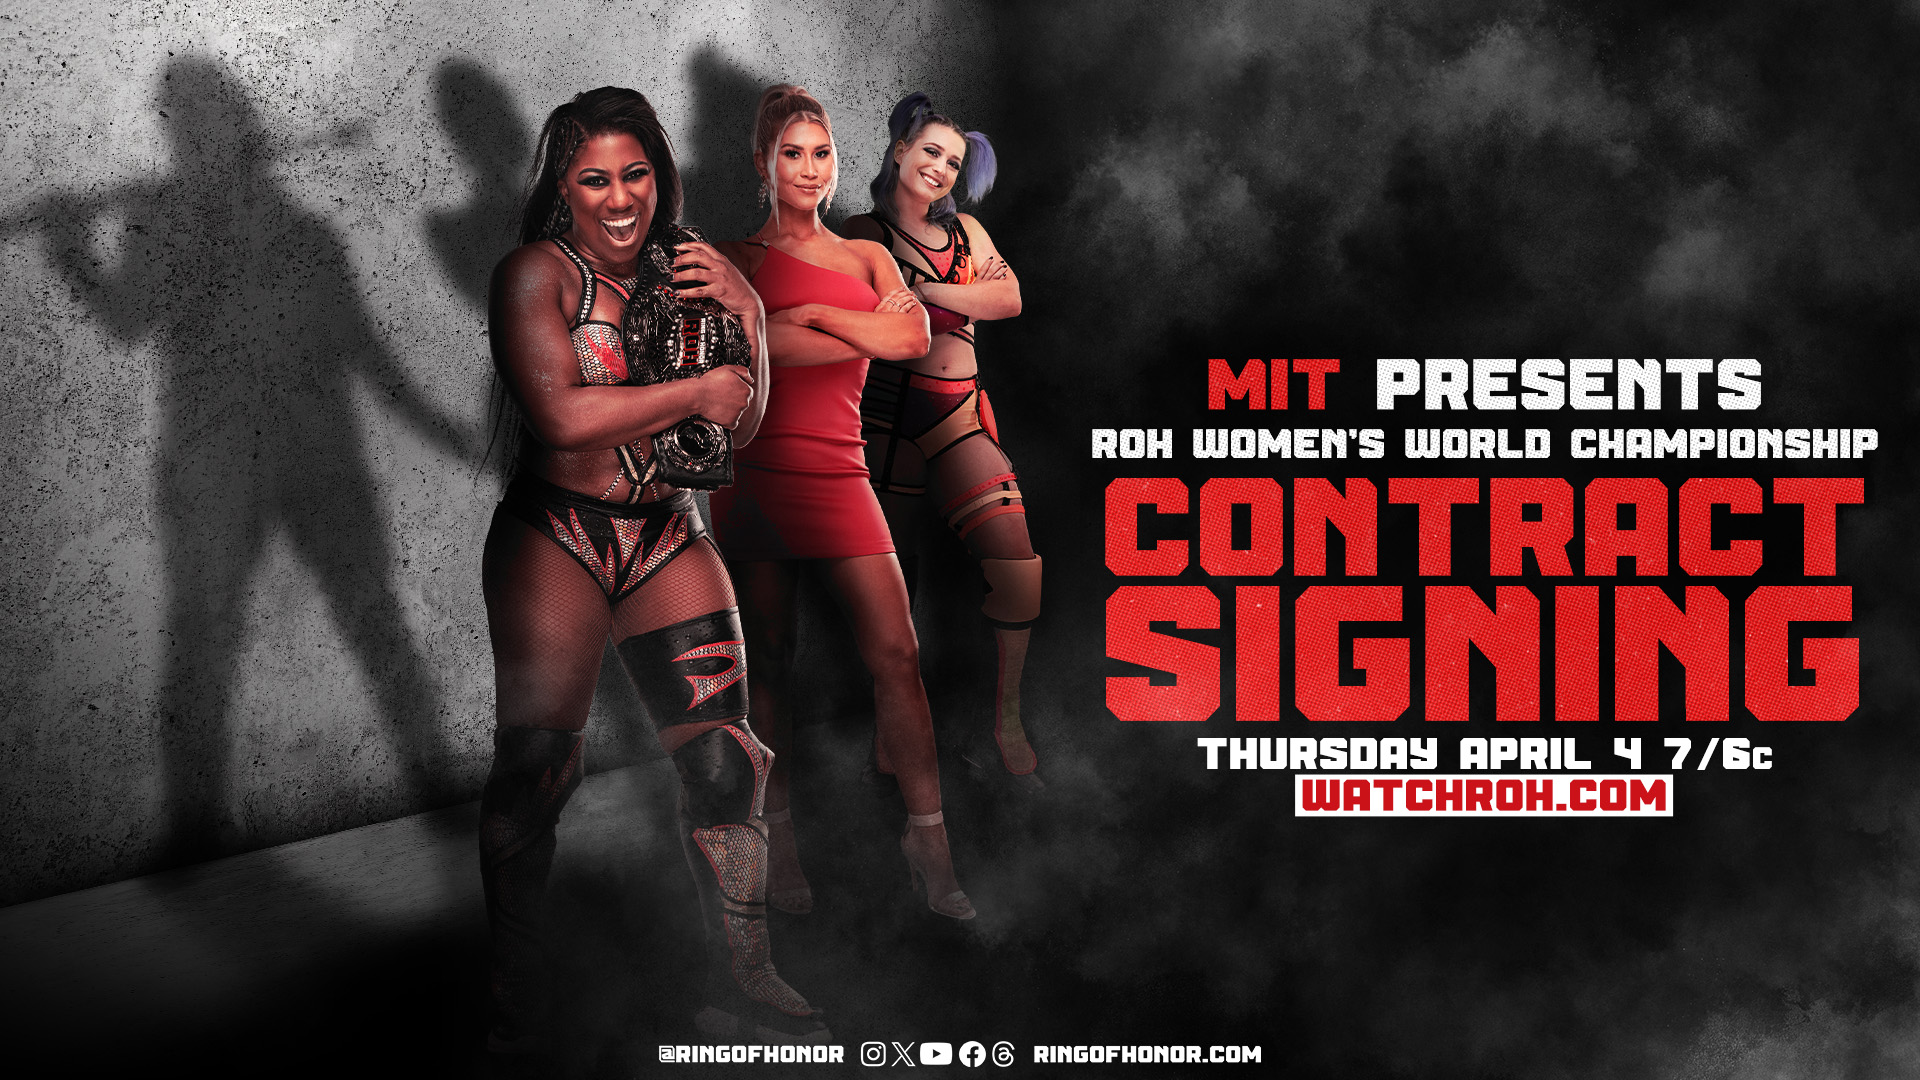 ROH Women’s Title Contract Signing Added To April 4 Show